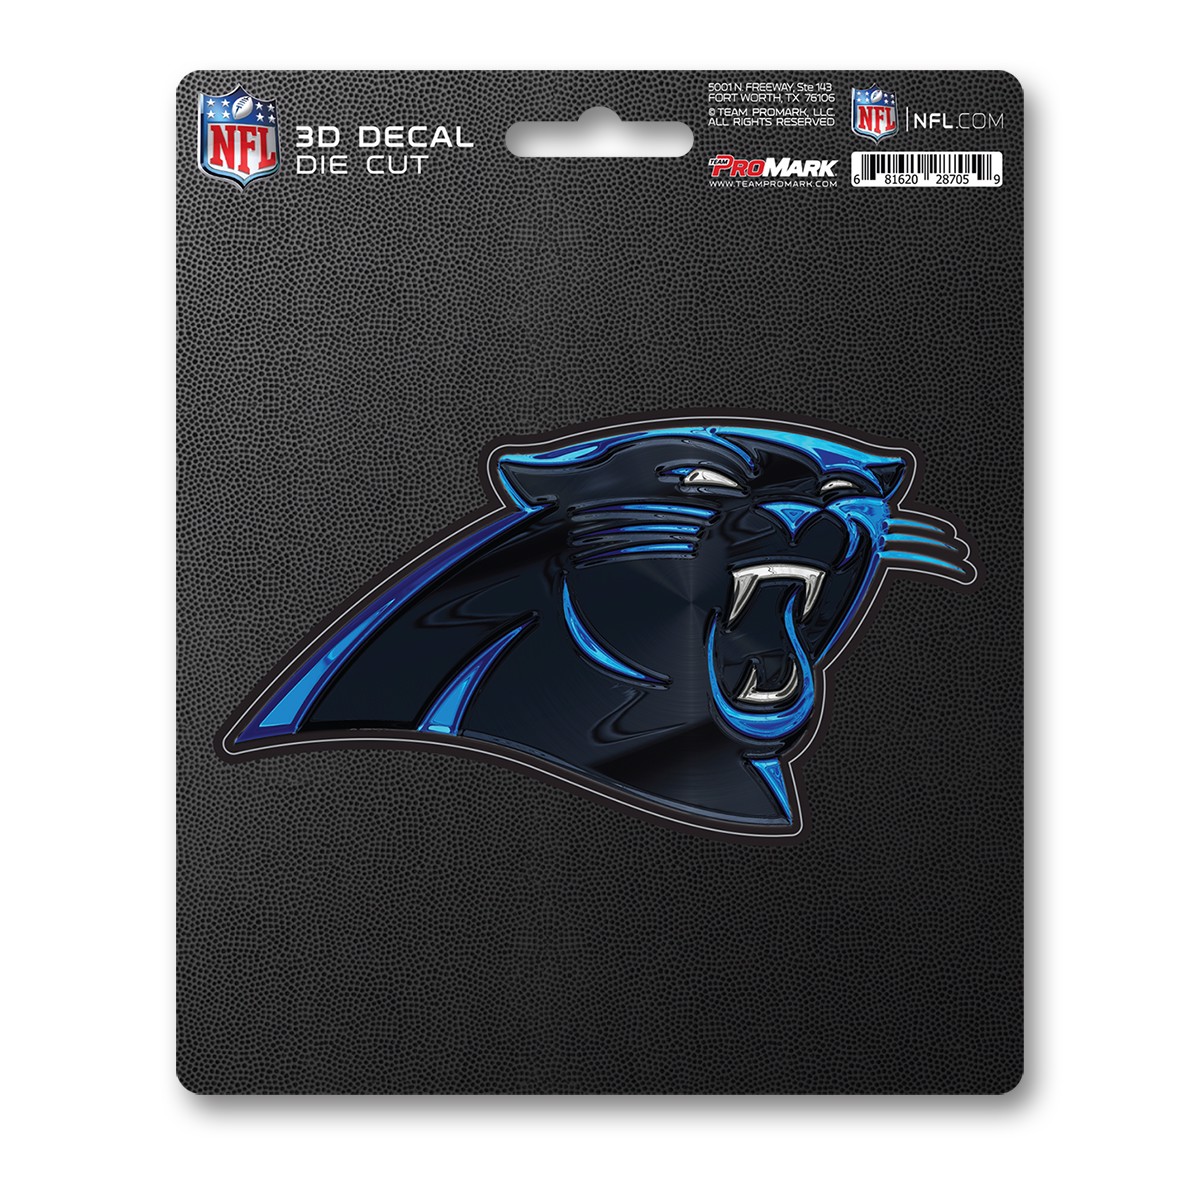 CAROLINA PANTHERS 4 SEPARTELY DIECUT STICKERS ON ONE VYNL STRIP 